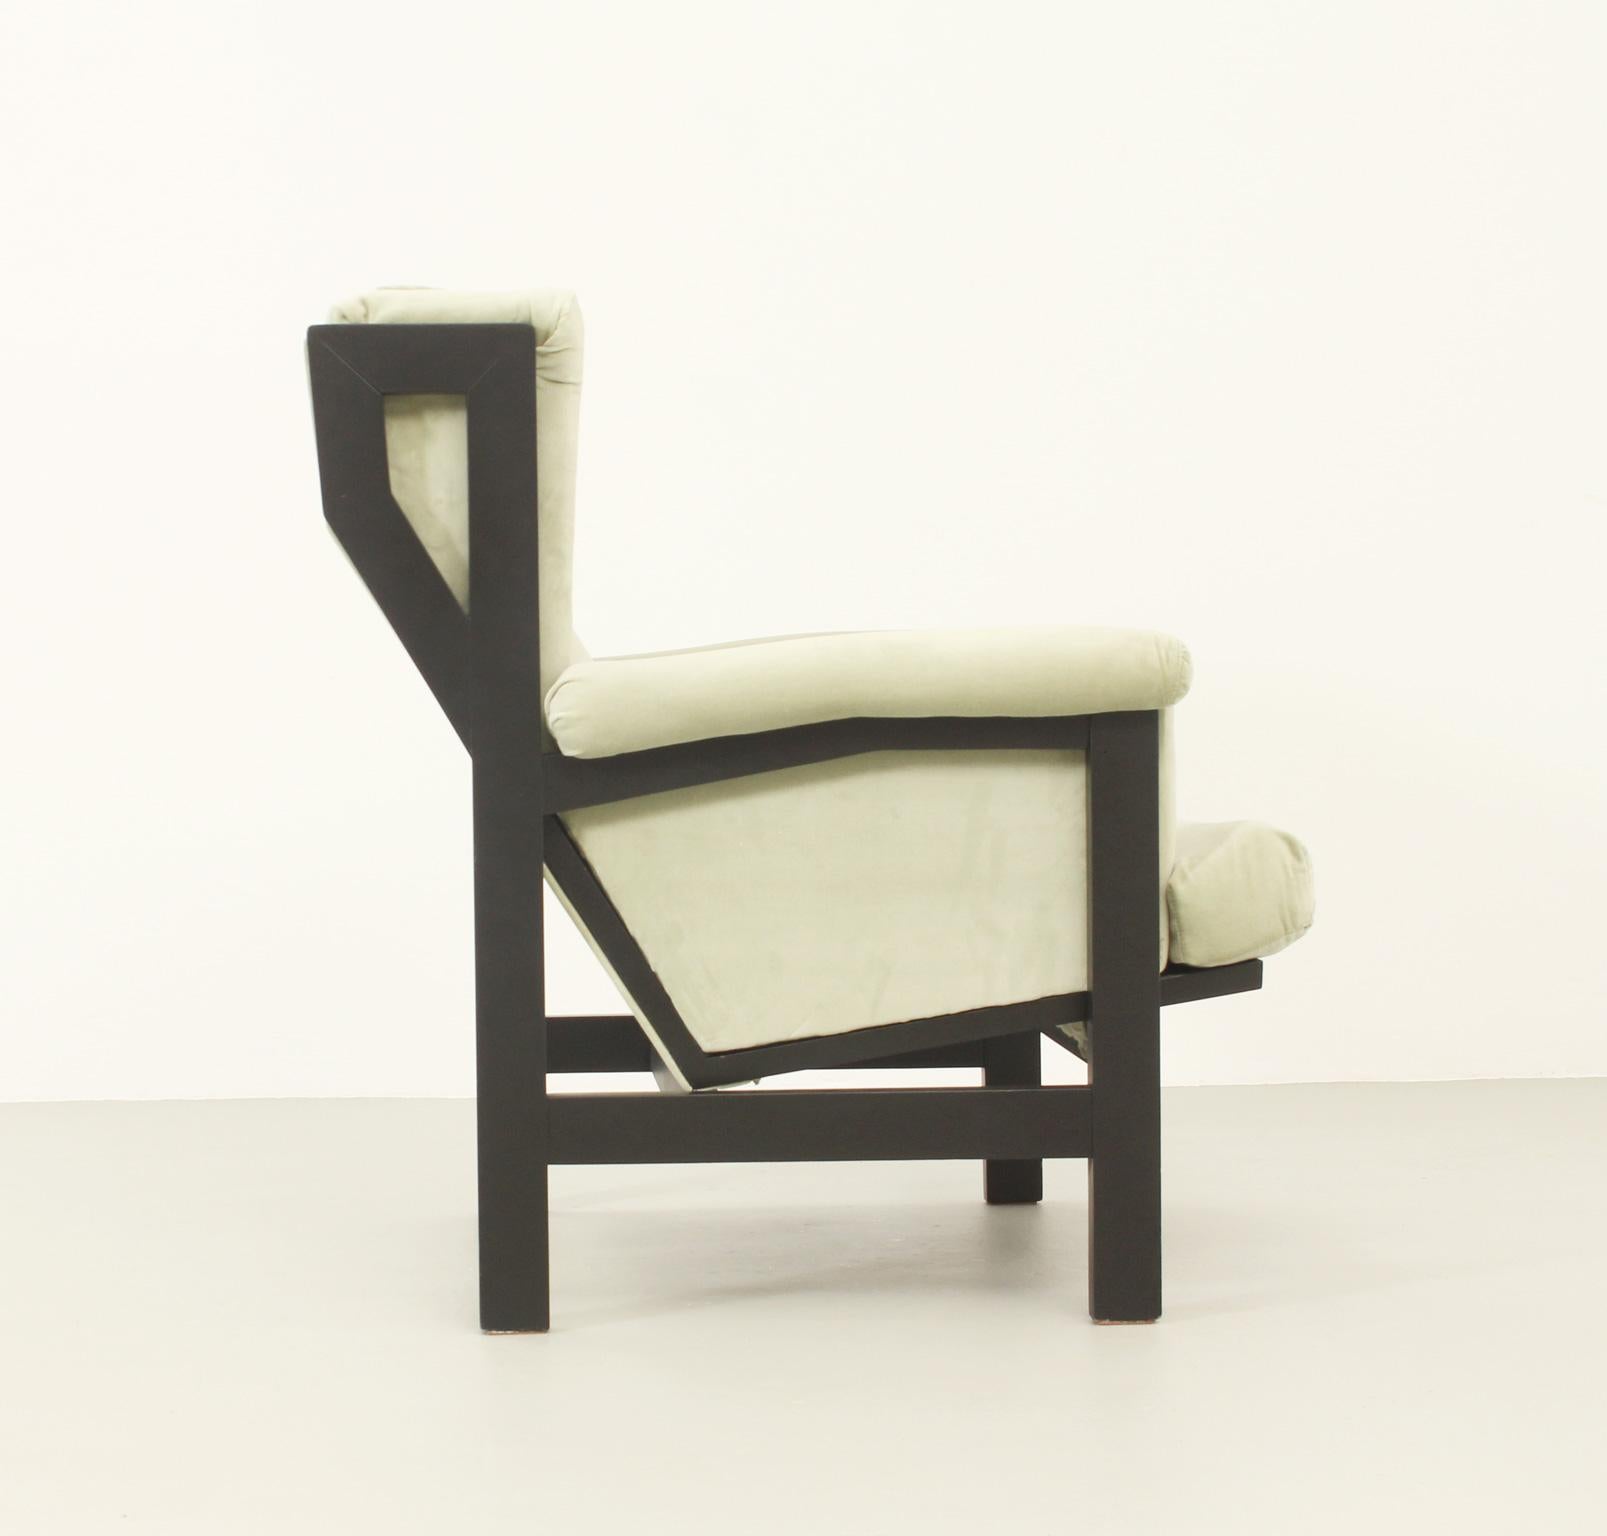 Spanish San Remo Armchair By Rafael Carreras, Spain, 1959 For Sale